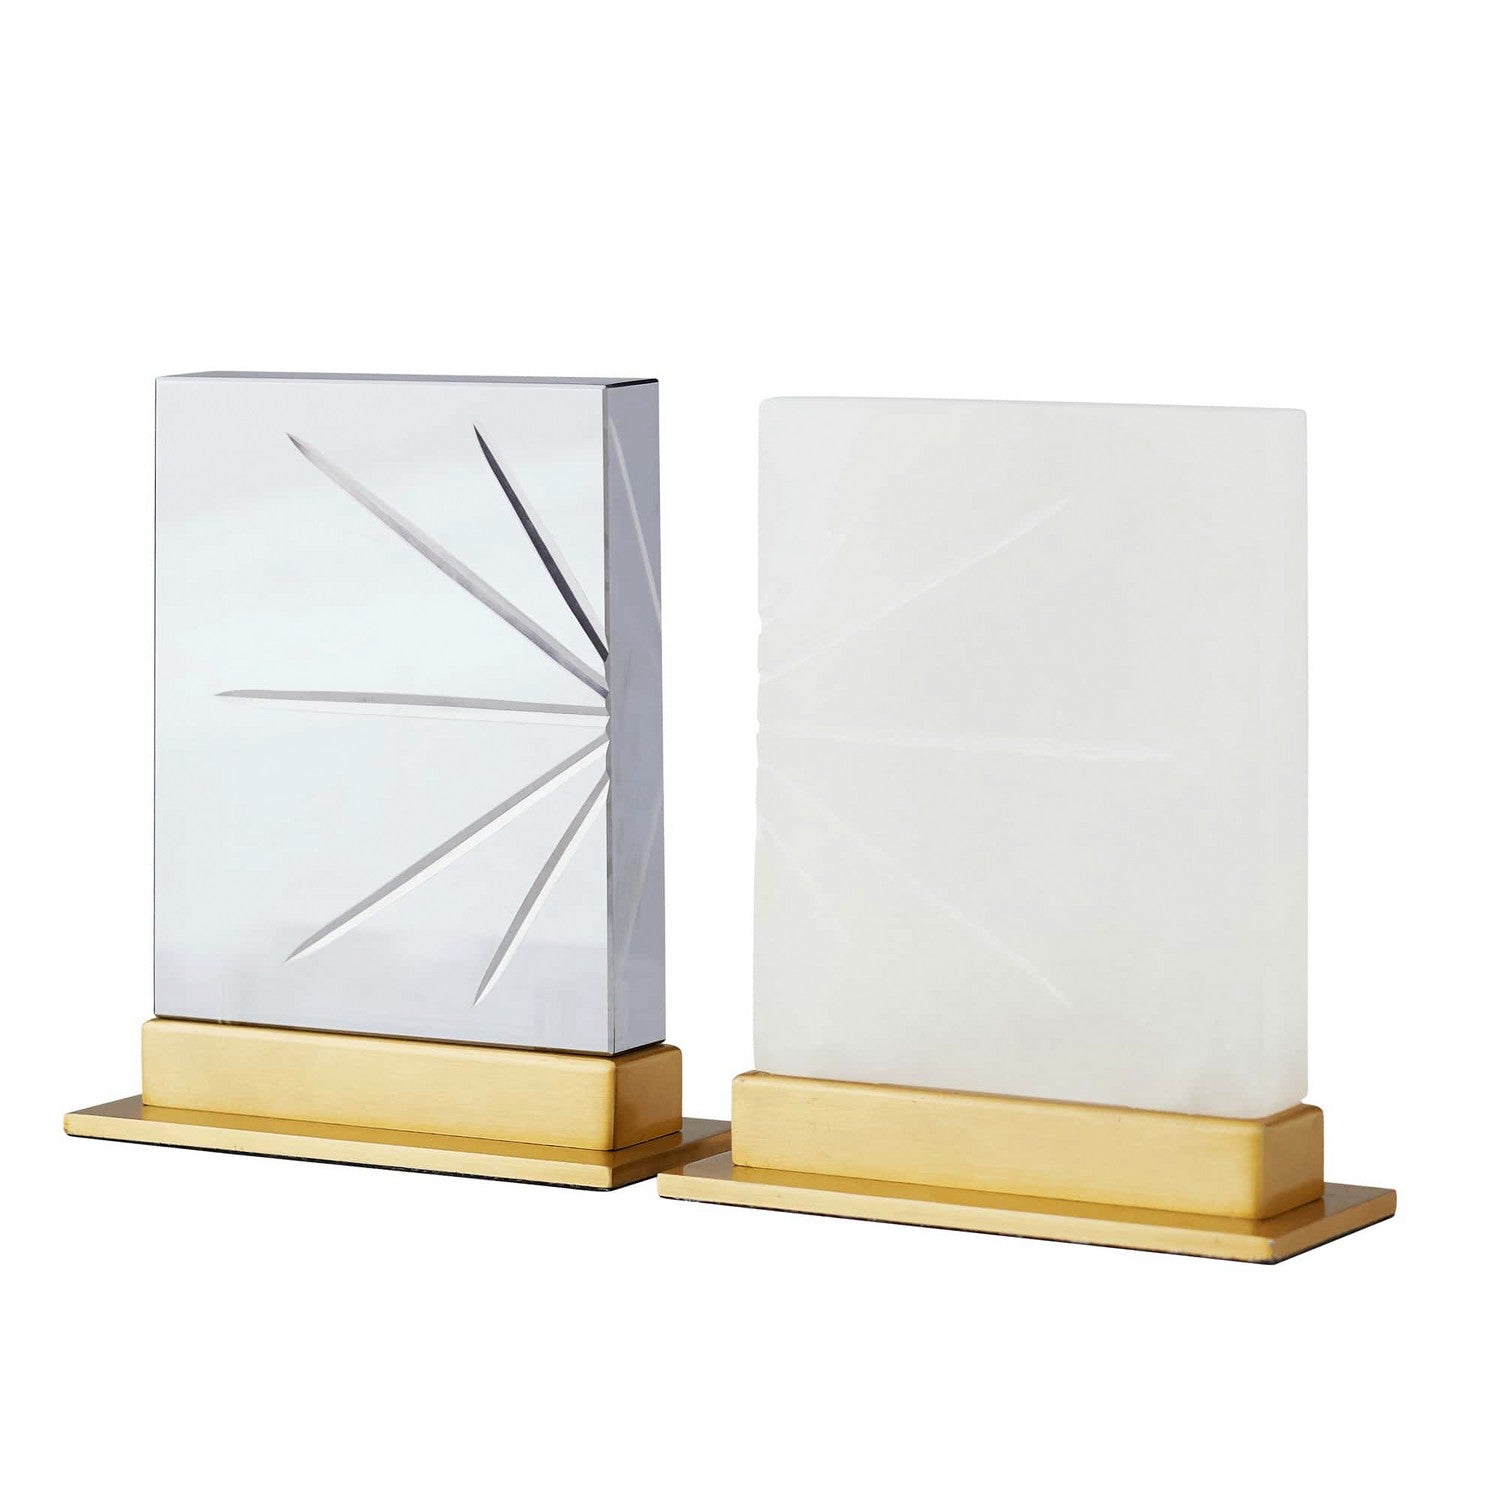 Sculptures, Set of 2 from the Veridian collection in White finish